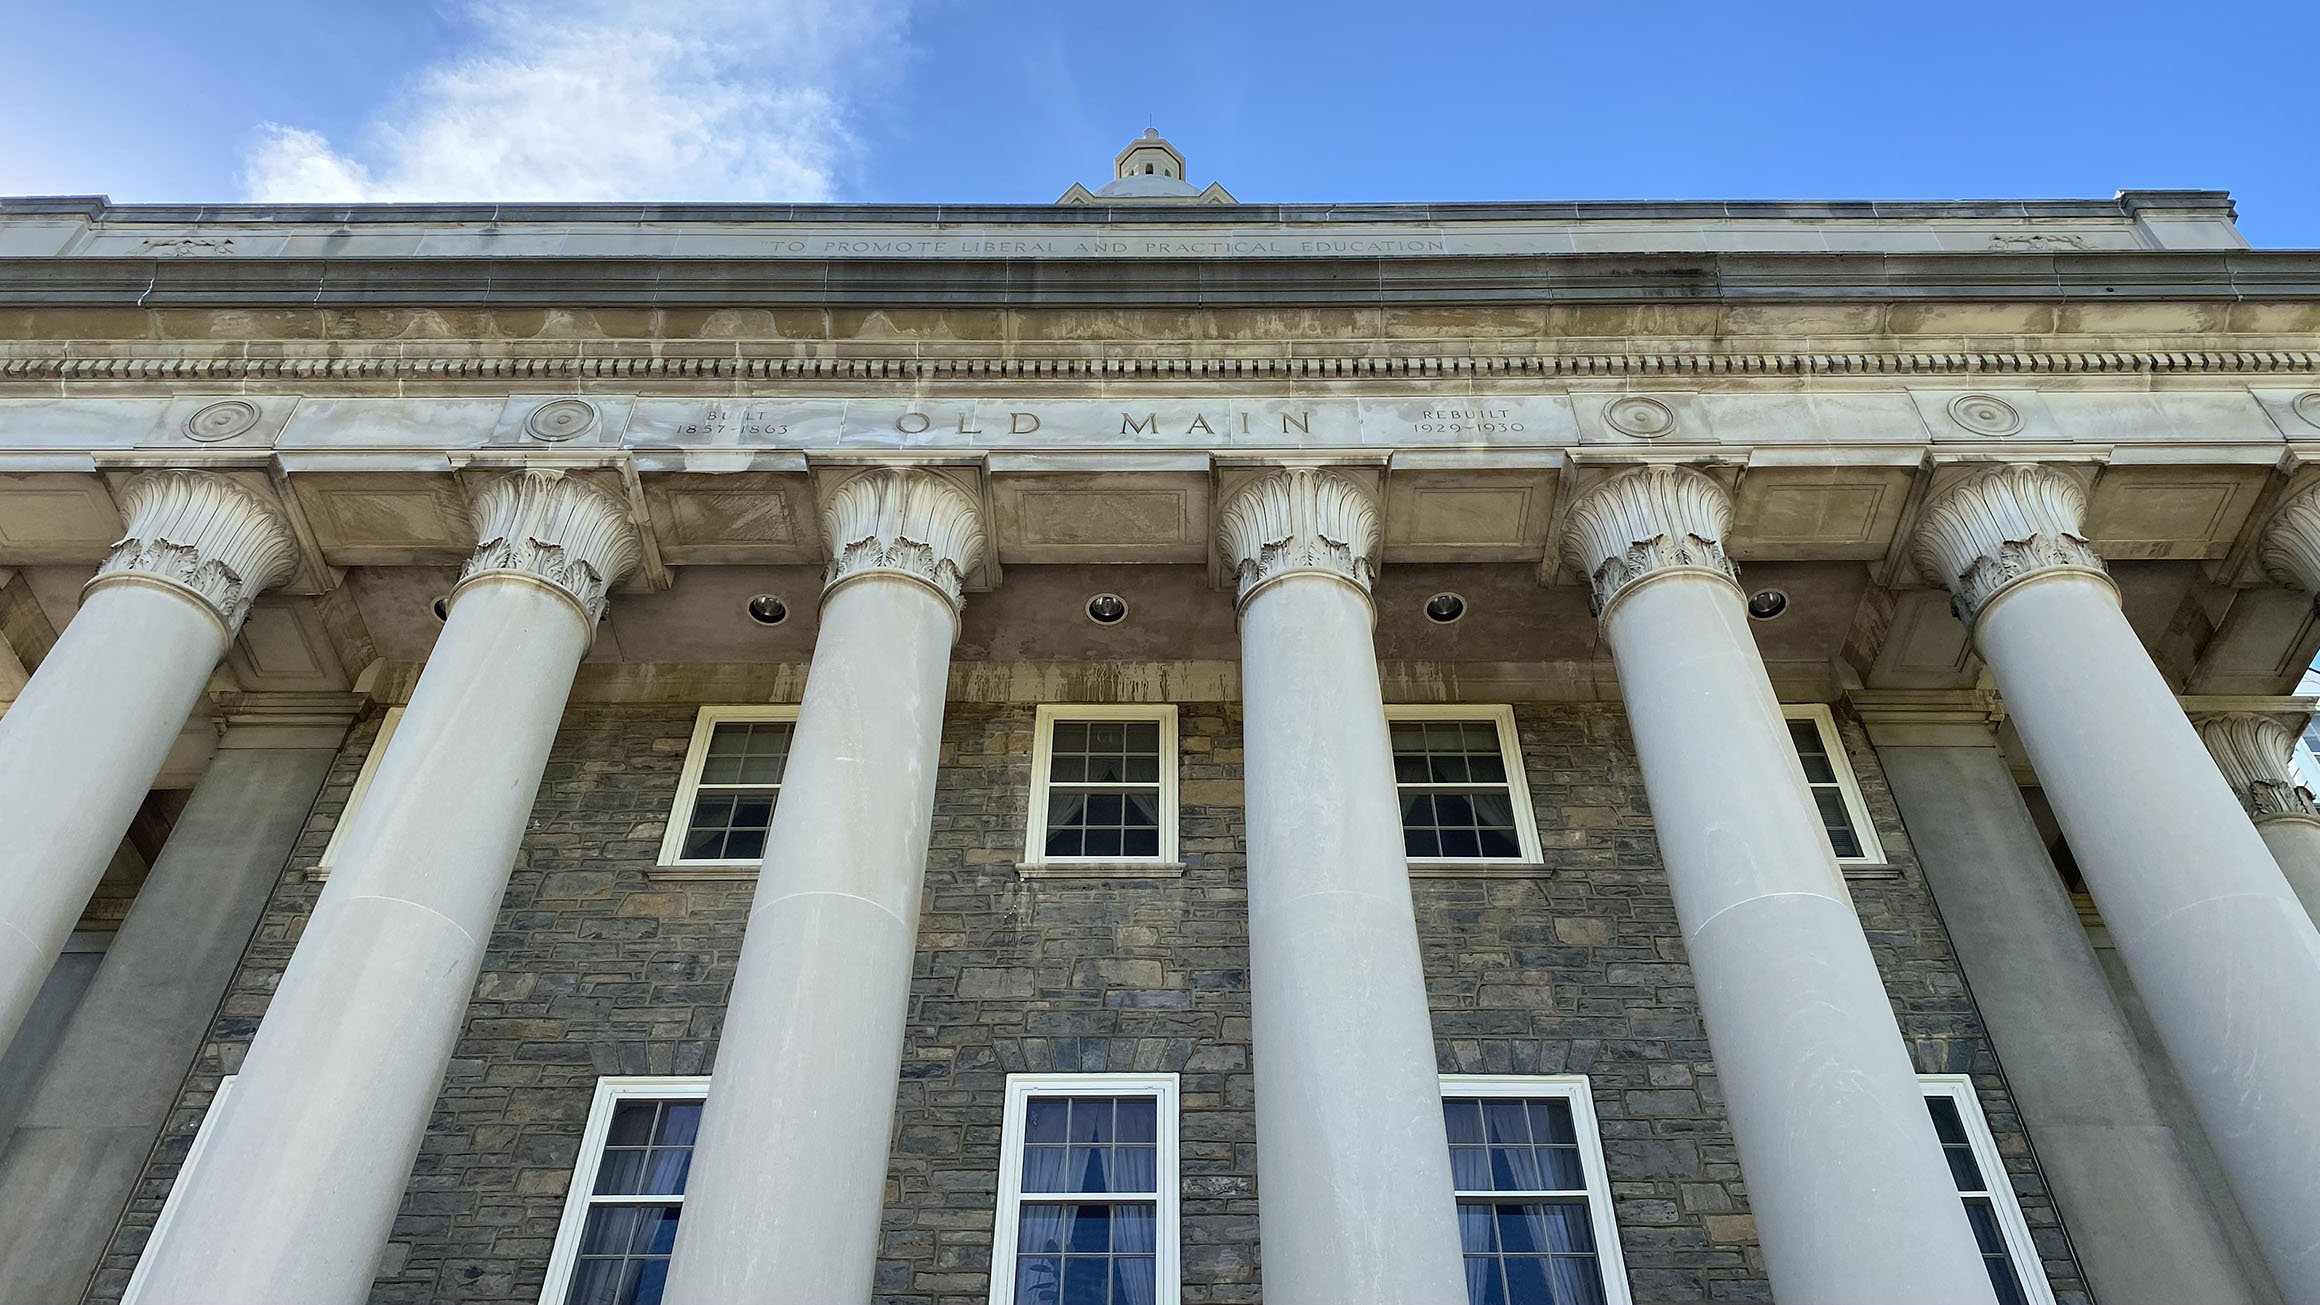 The columns of the front of Old Main